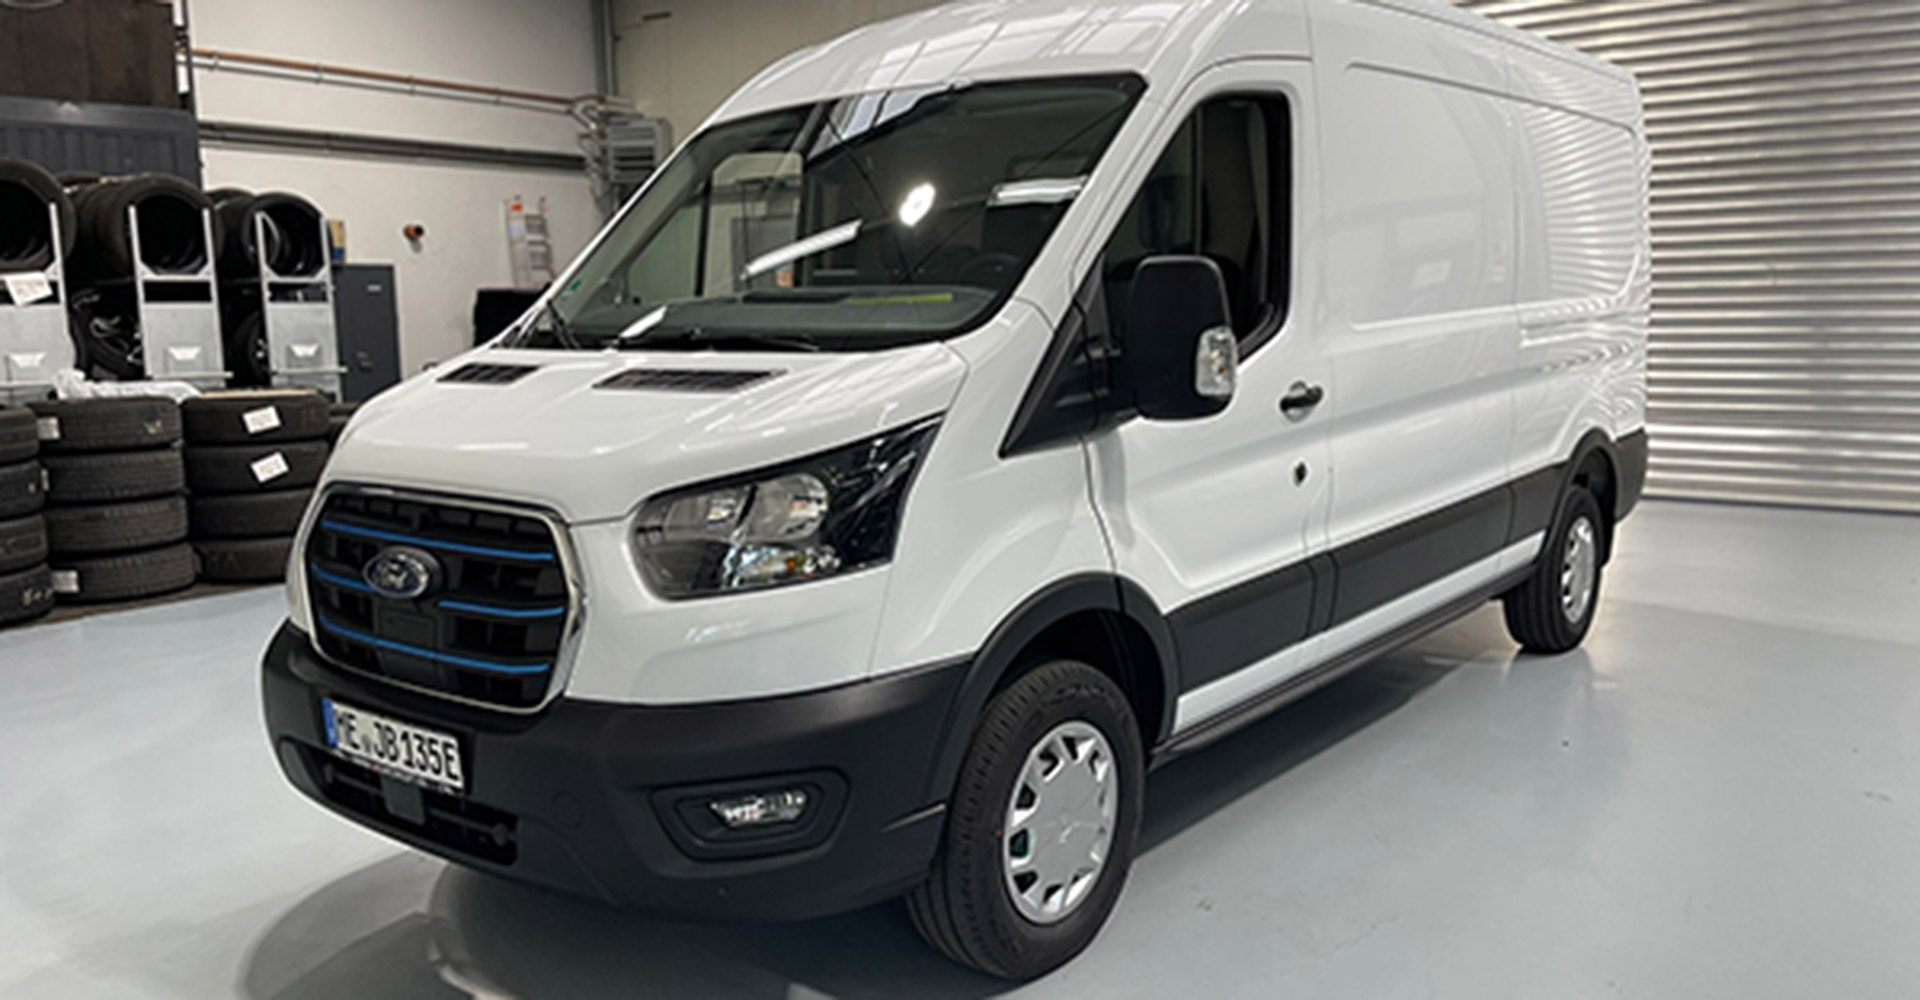 Ford E-Transit – available at JB CarConcept for comparisons, events and tests